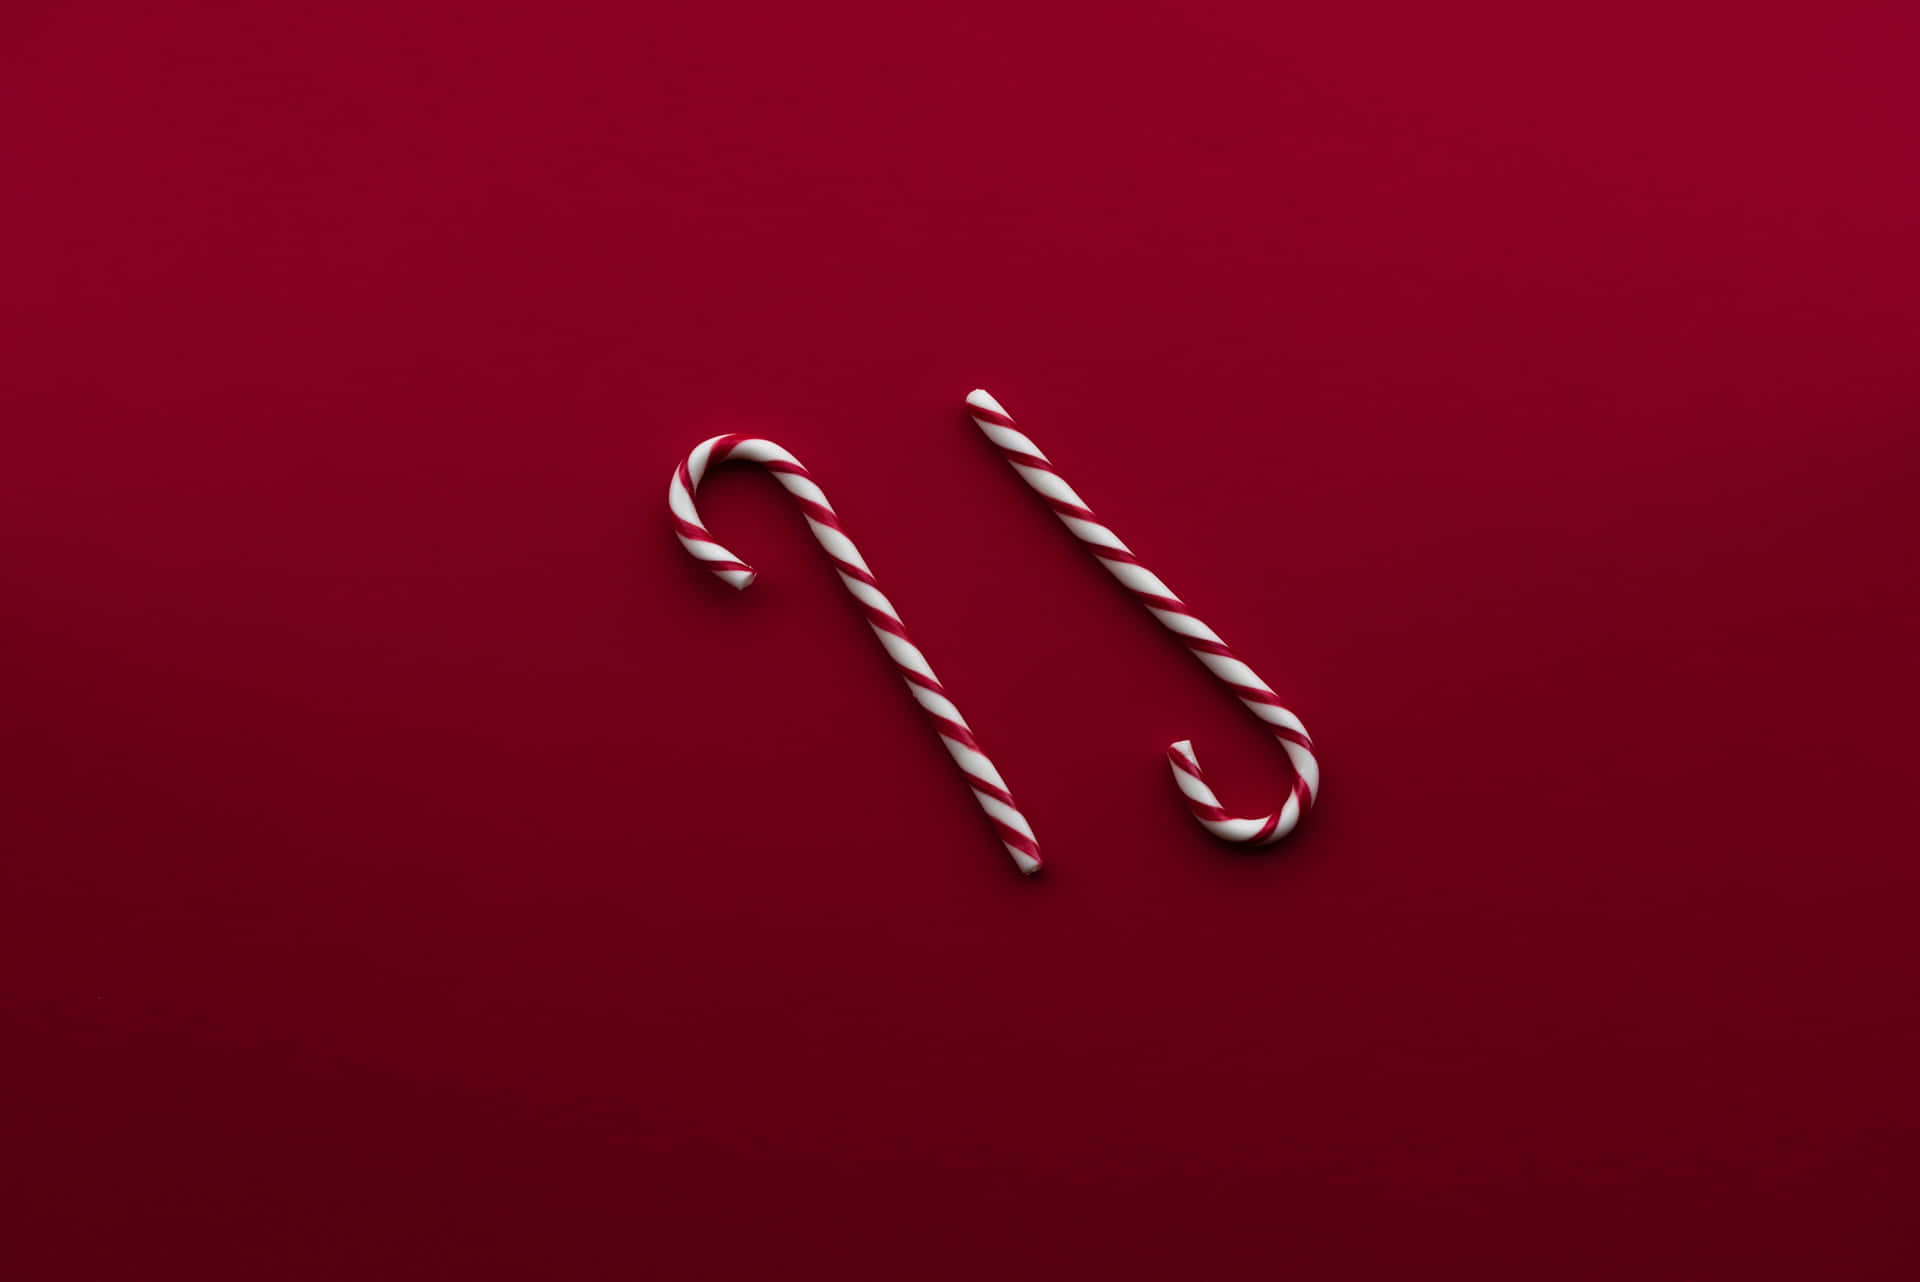 Sweet and flavorful candy cane against red and white backdrop.